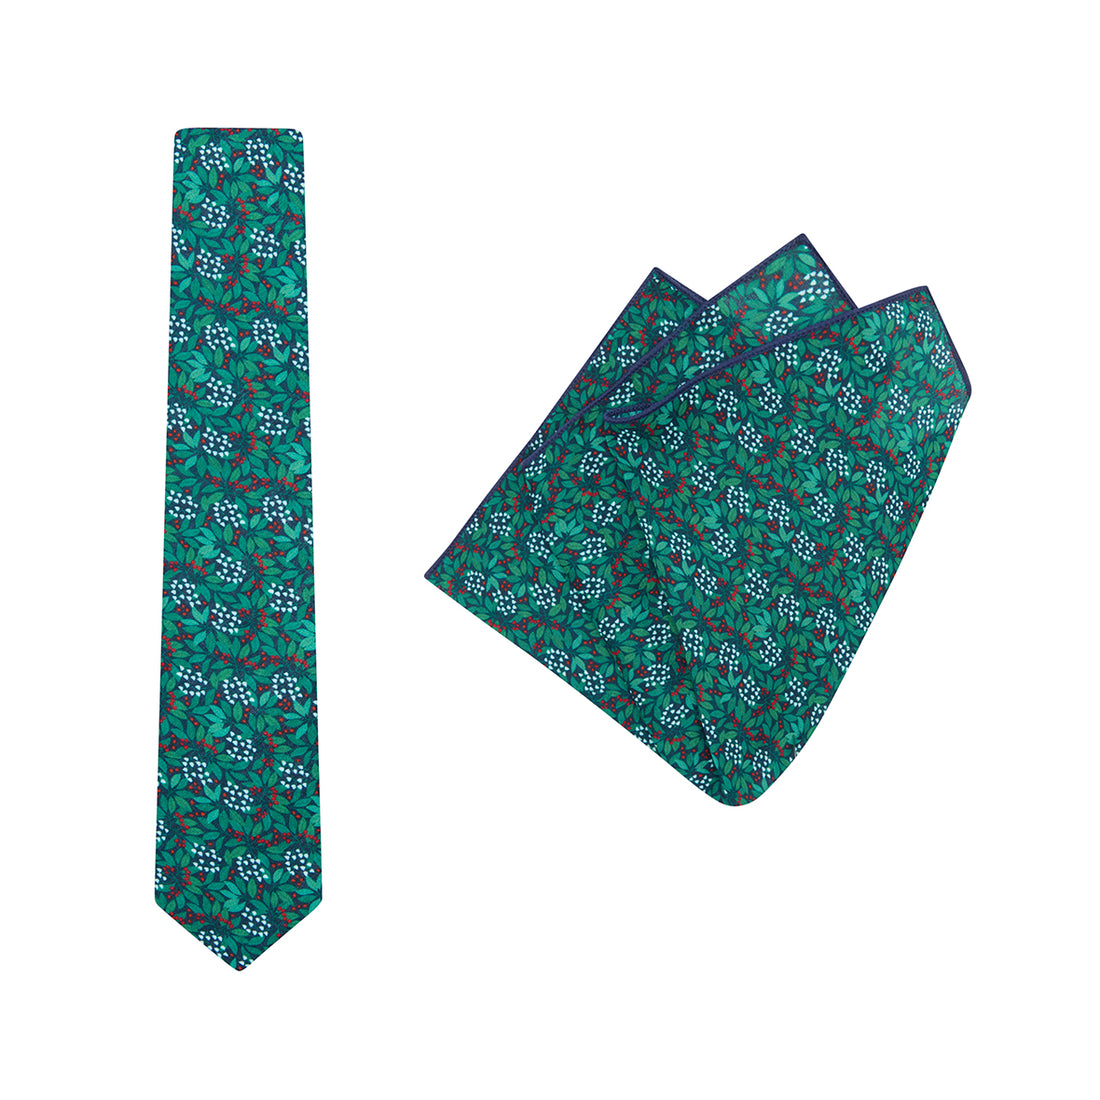 TIE + POCKET SQUARE SET. Jocelyn Proust Small Flower Print. Navy/Red. Supplied with matching pocket square.-Ties-PEROZ Accessories